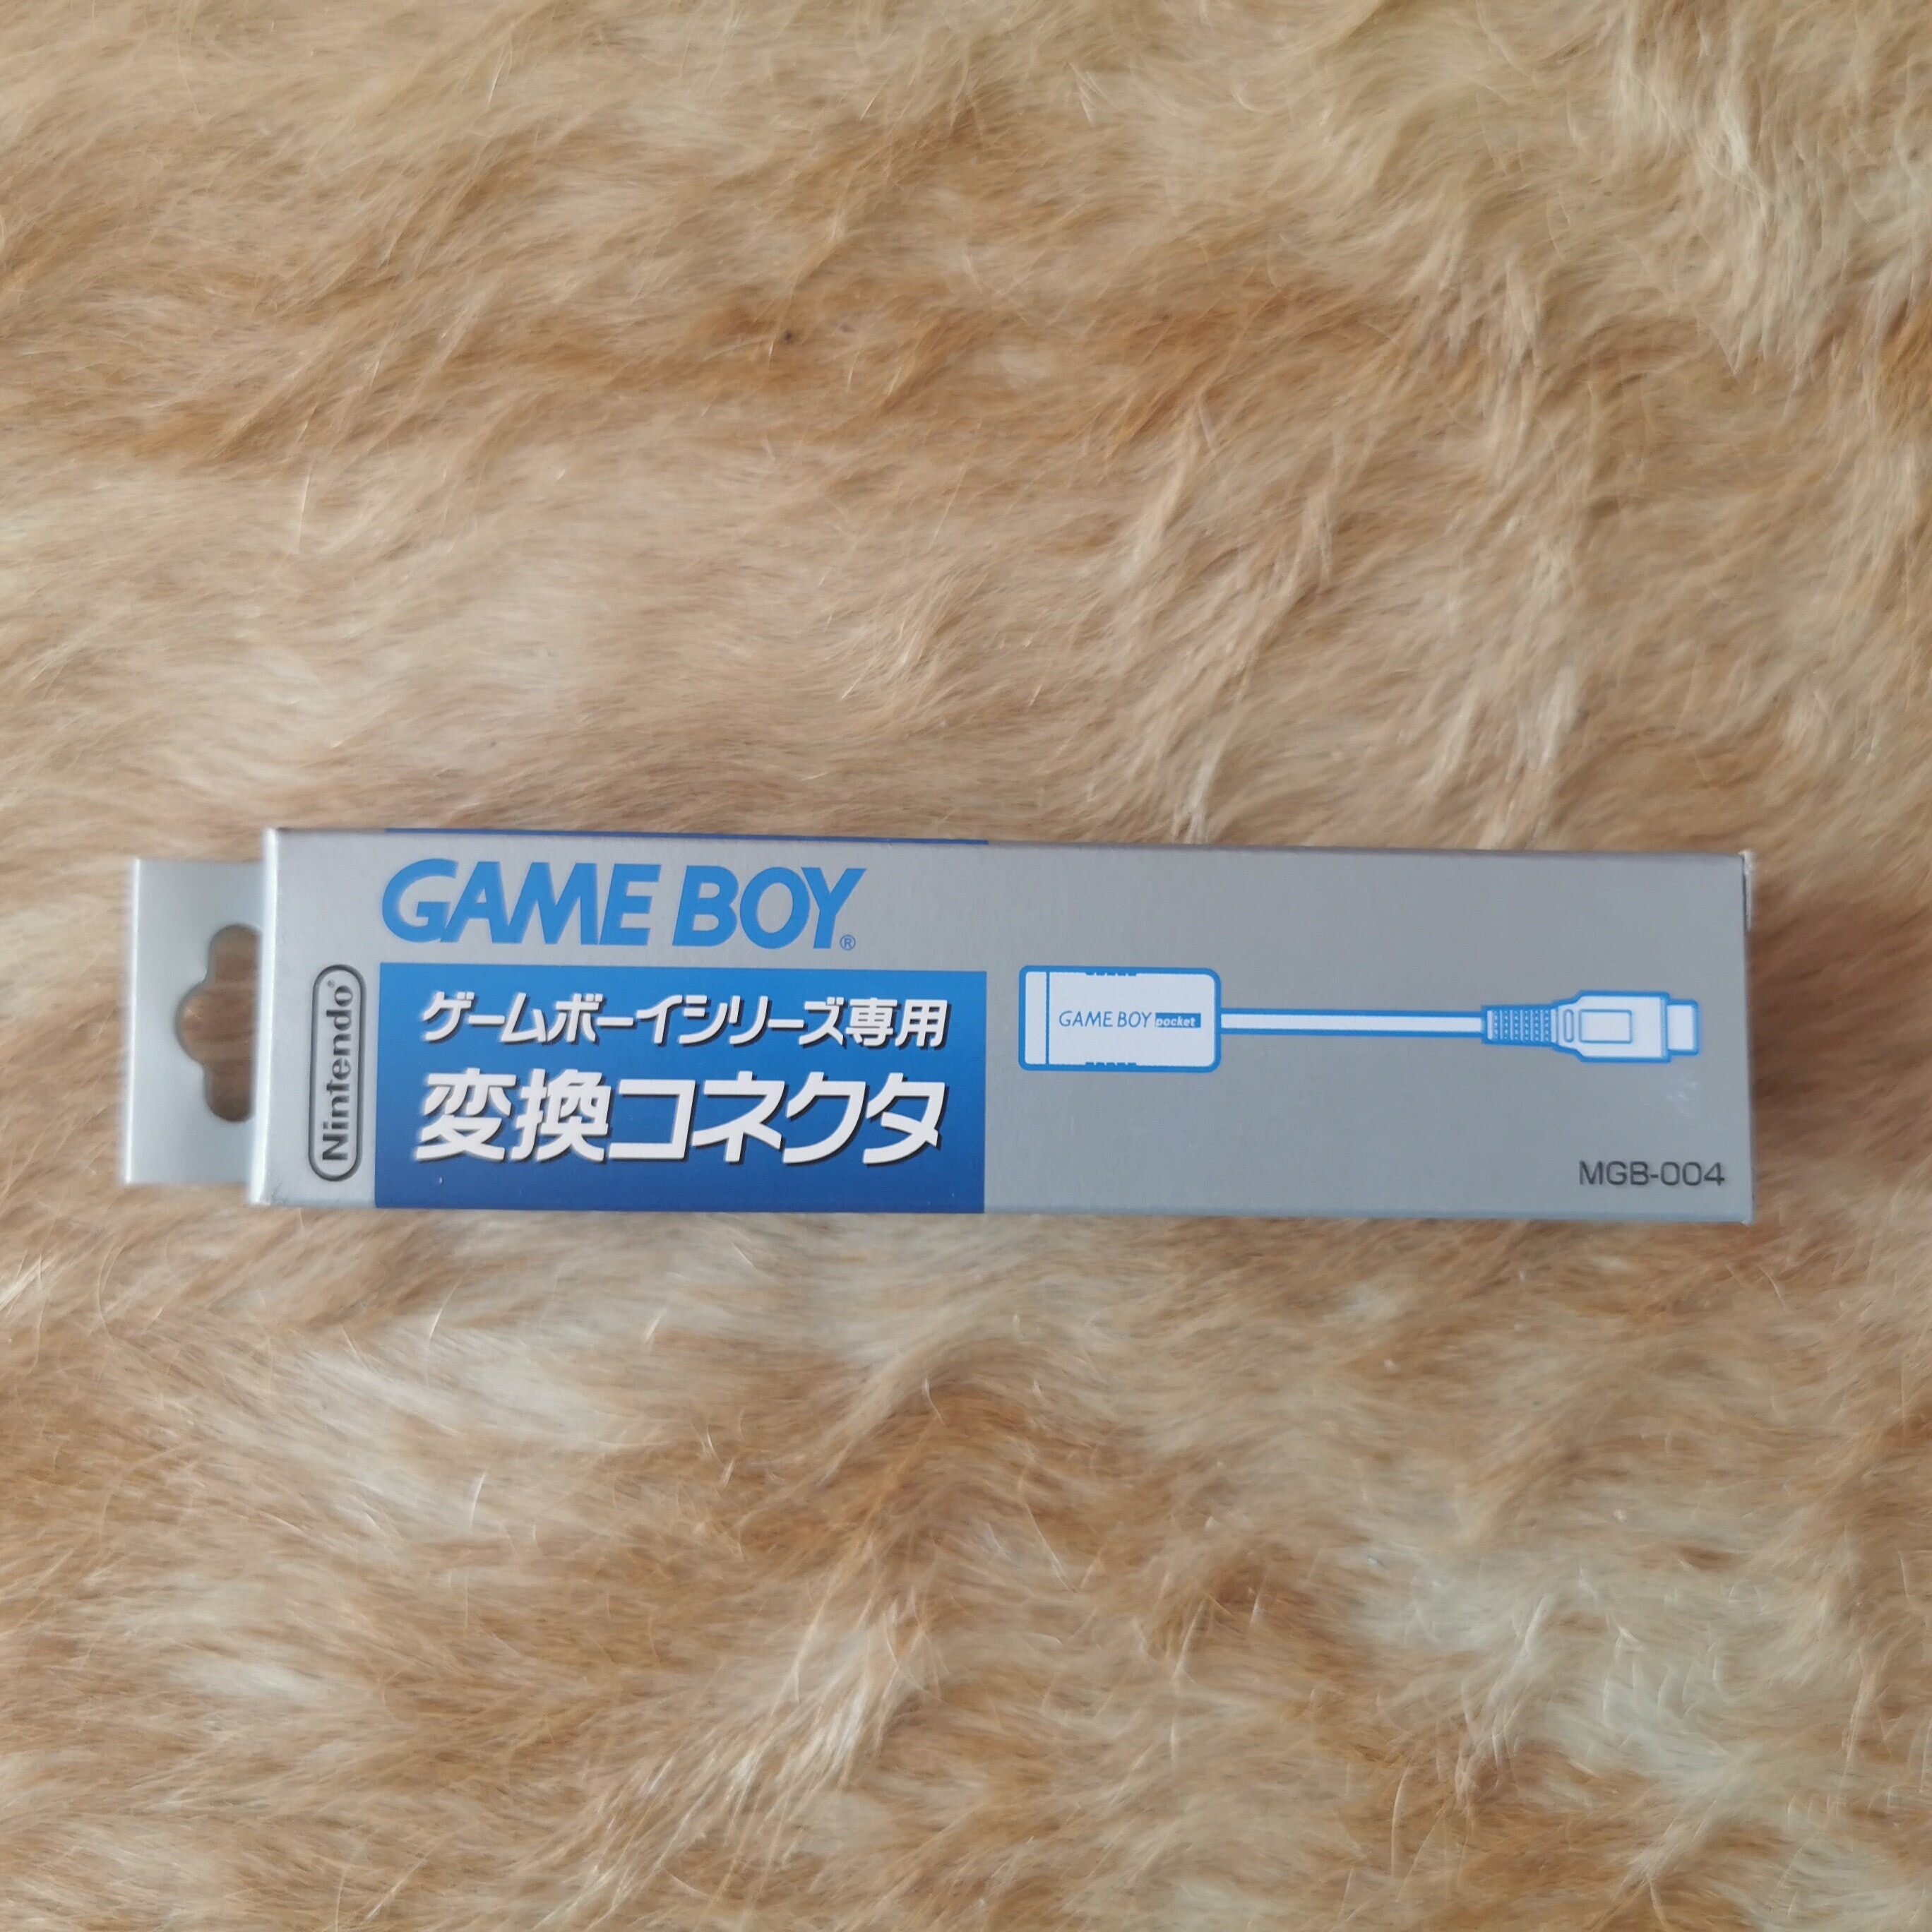  Nintendo Game Boy Classic Adapter Cable [JP]